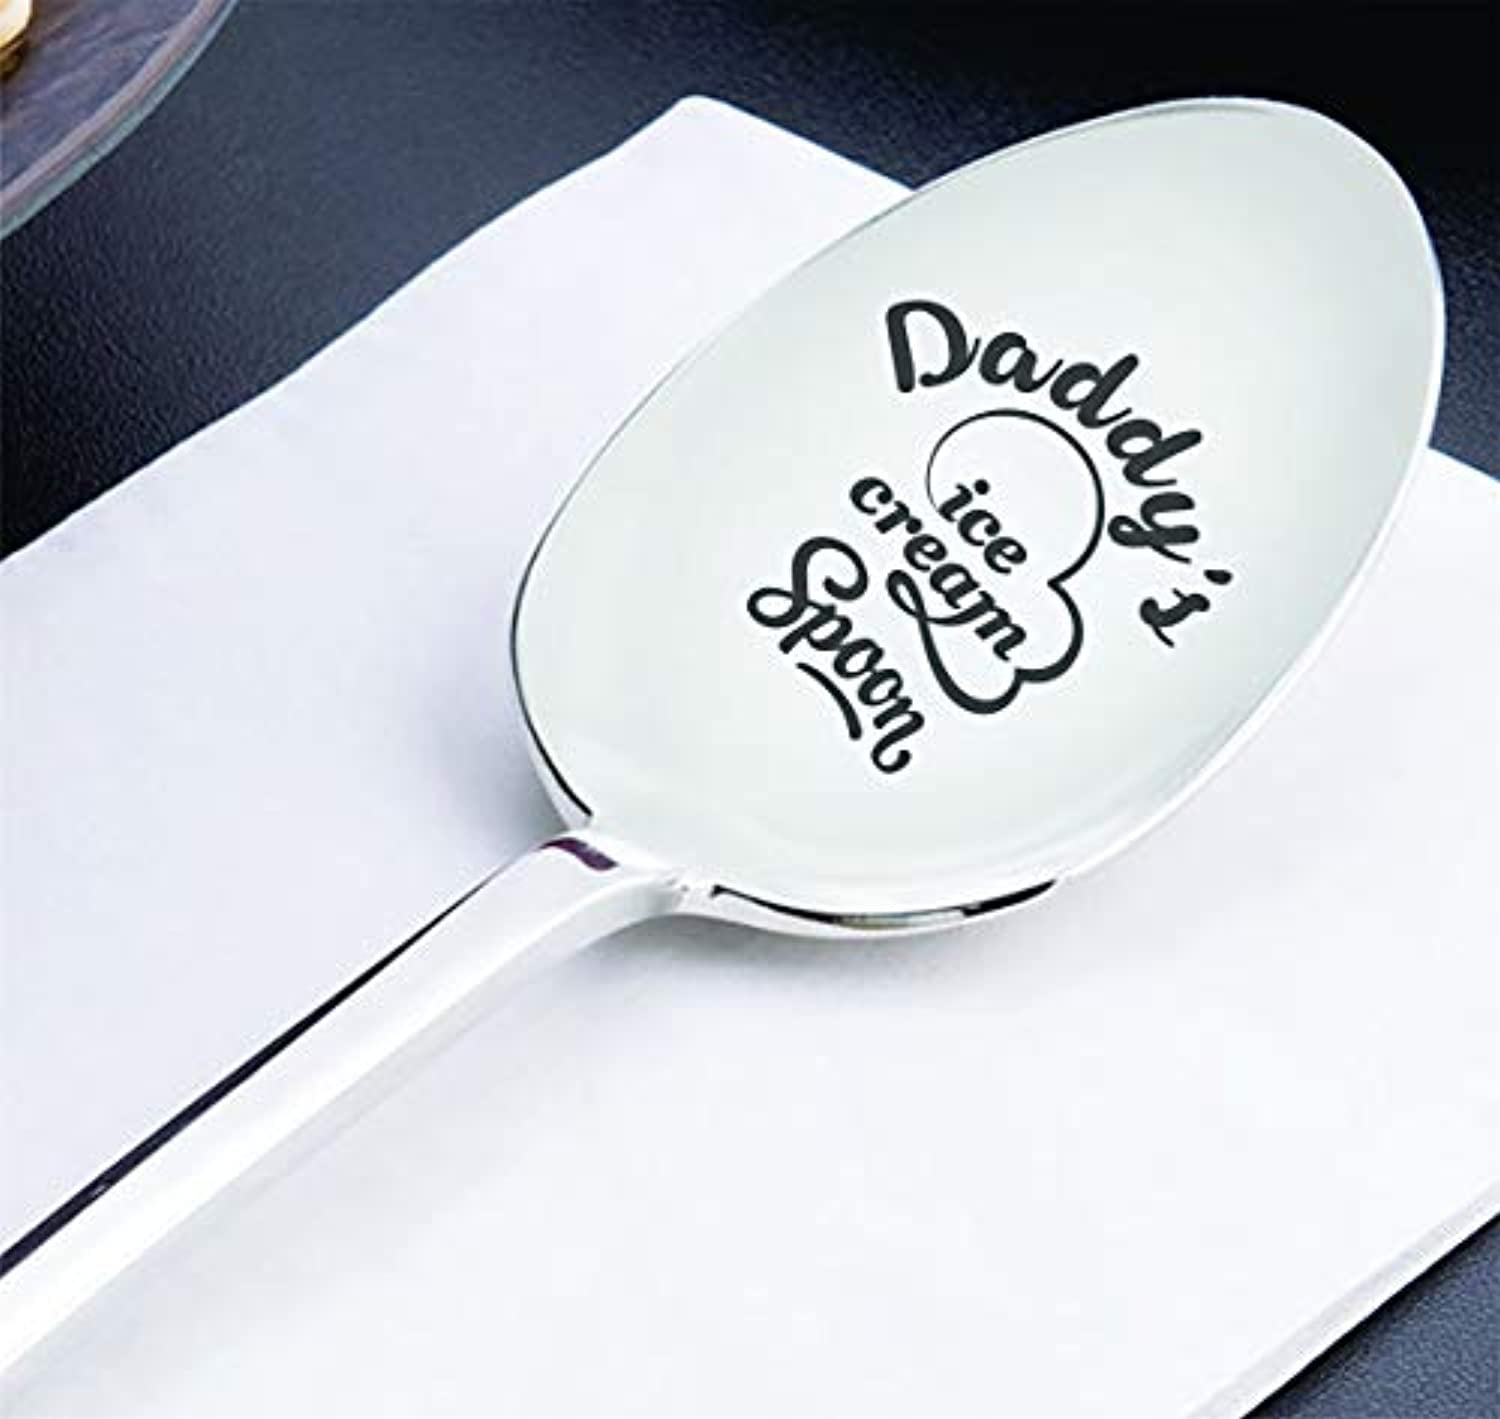  Husband Gifts - Fathers Day Husband Gifts from Wife, Gift for  Husband Ice Cream Bowl with Scoop & Shovel Spoon Set, Husband Ice Cream  Cereal Bowl Present from Wife, Cool Birthday